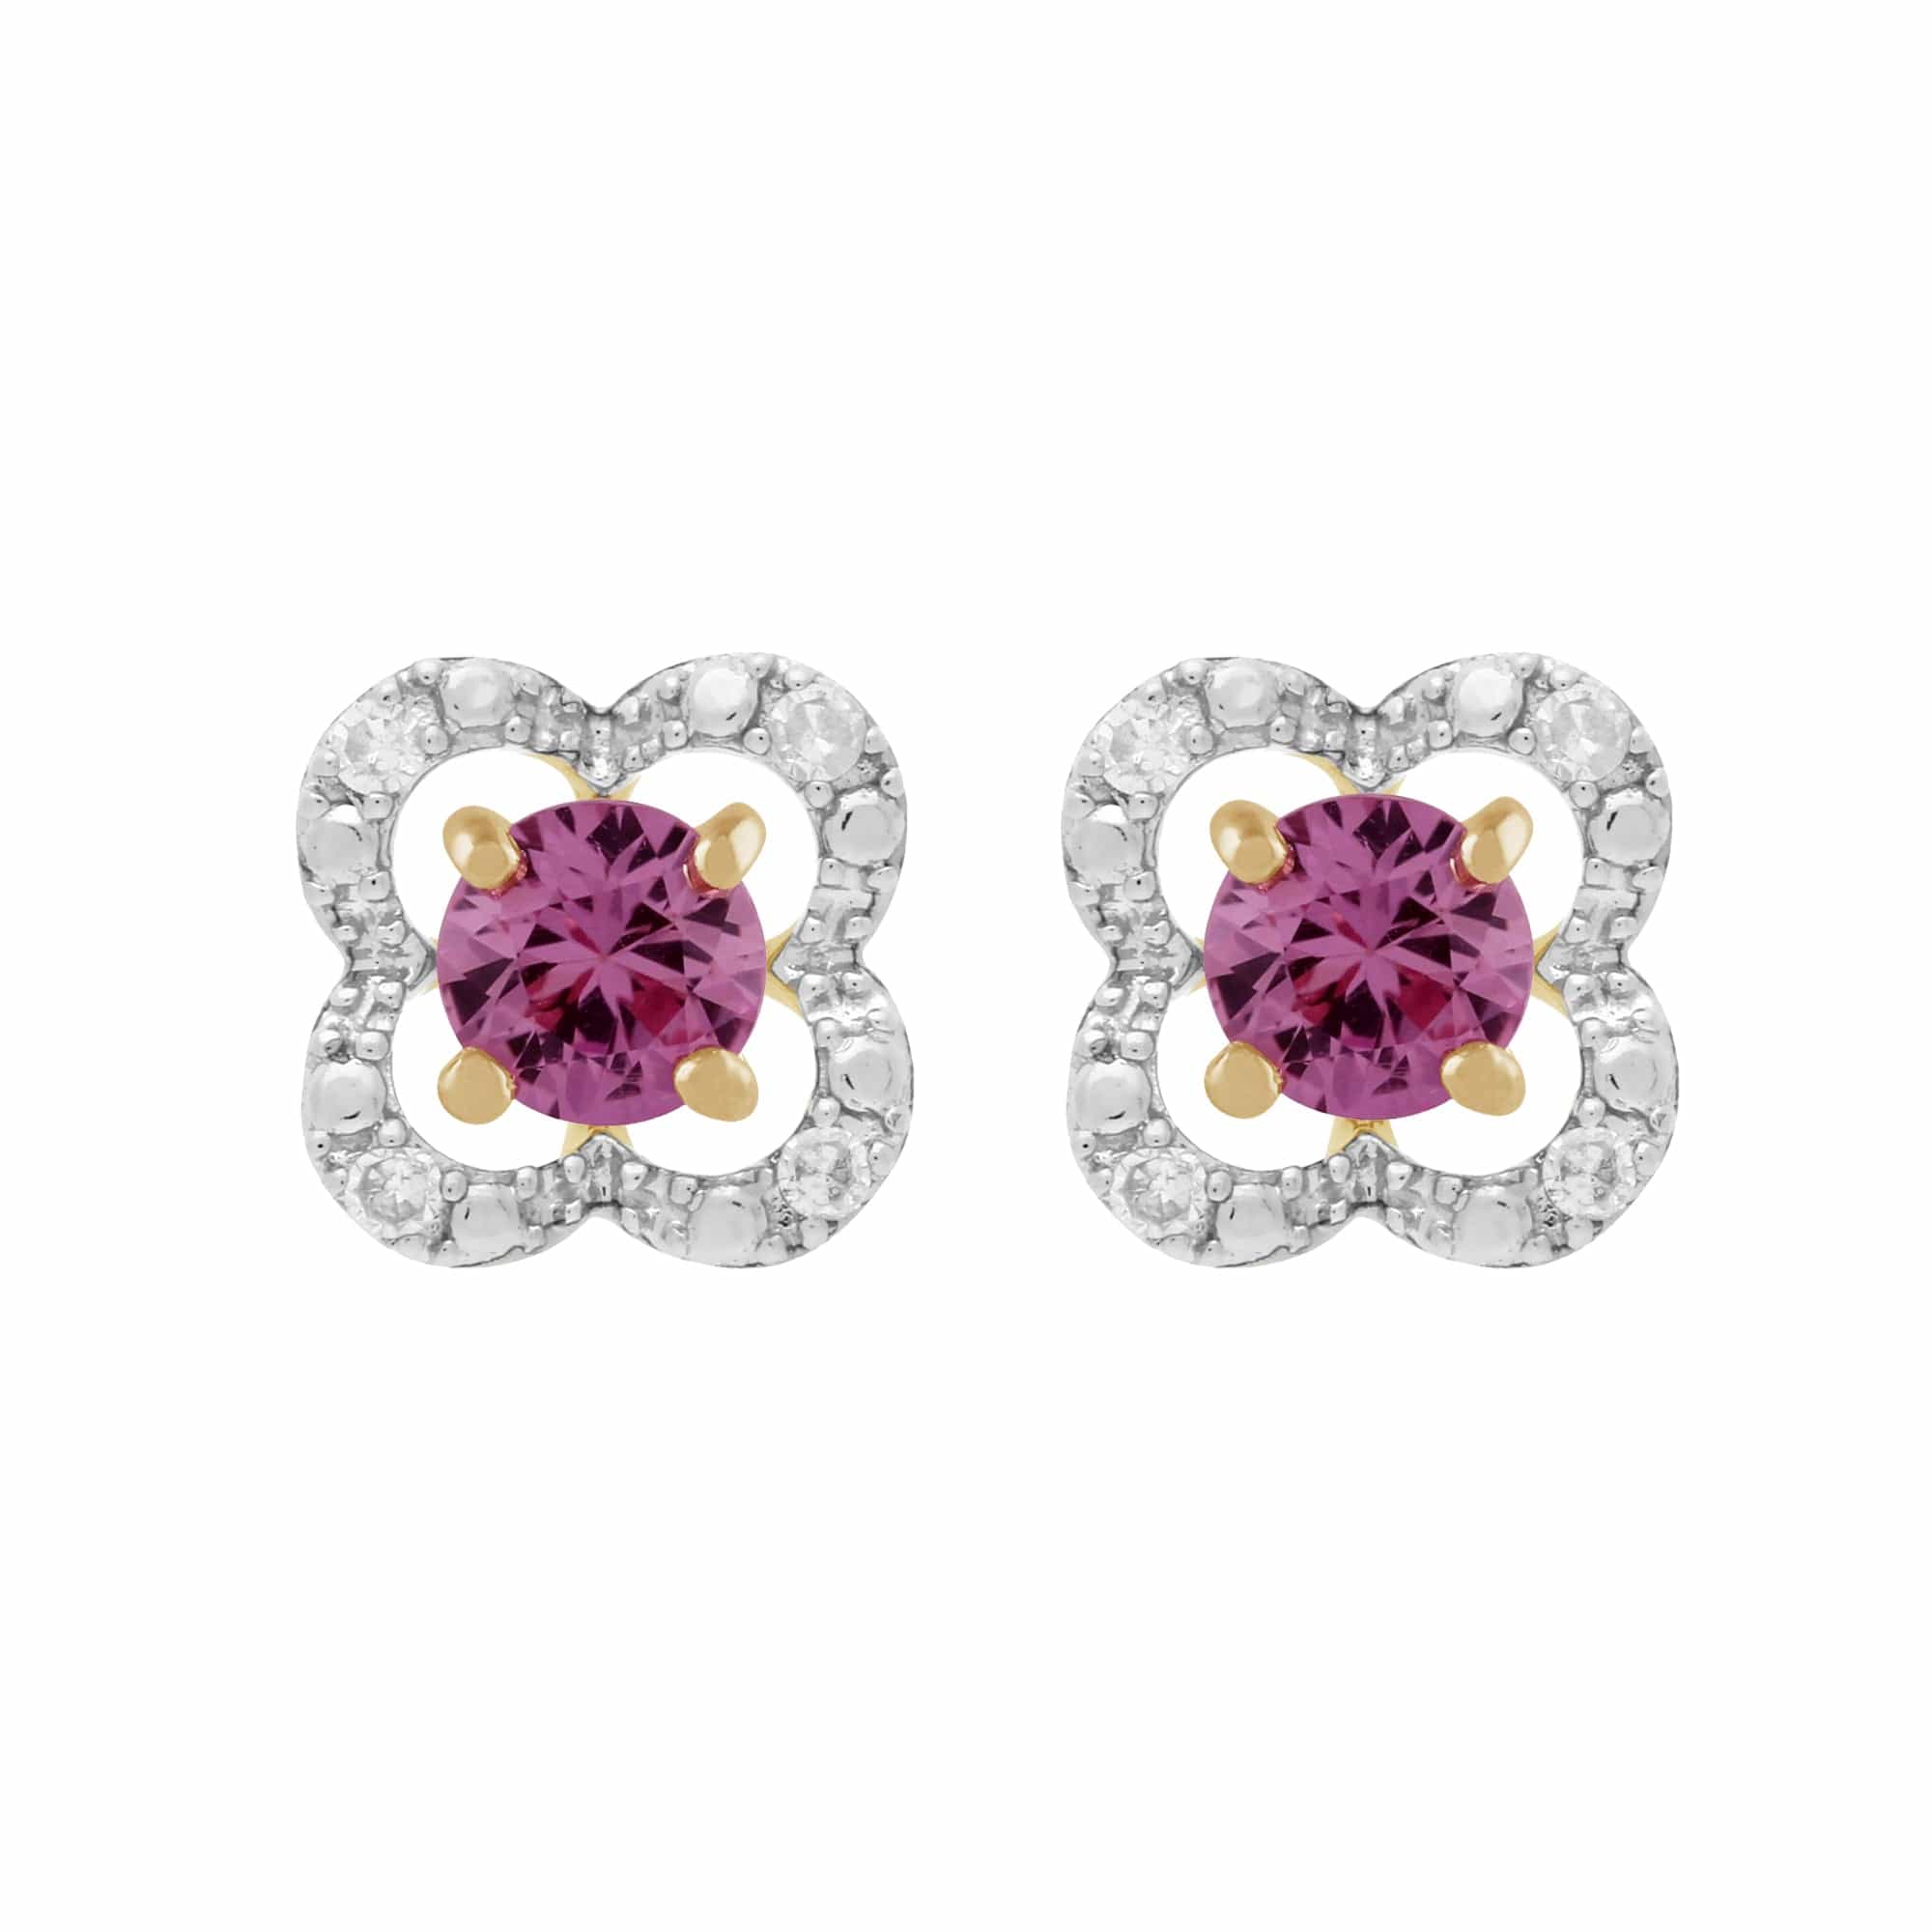 183E0083259-191E0375019 Classic Round Pink Sapphire Studs with Detachable Diamond Floral Ear Jacket in 9ct Yellow Gold 1